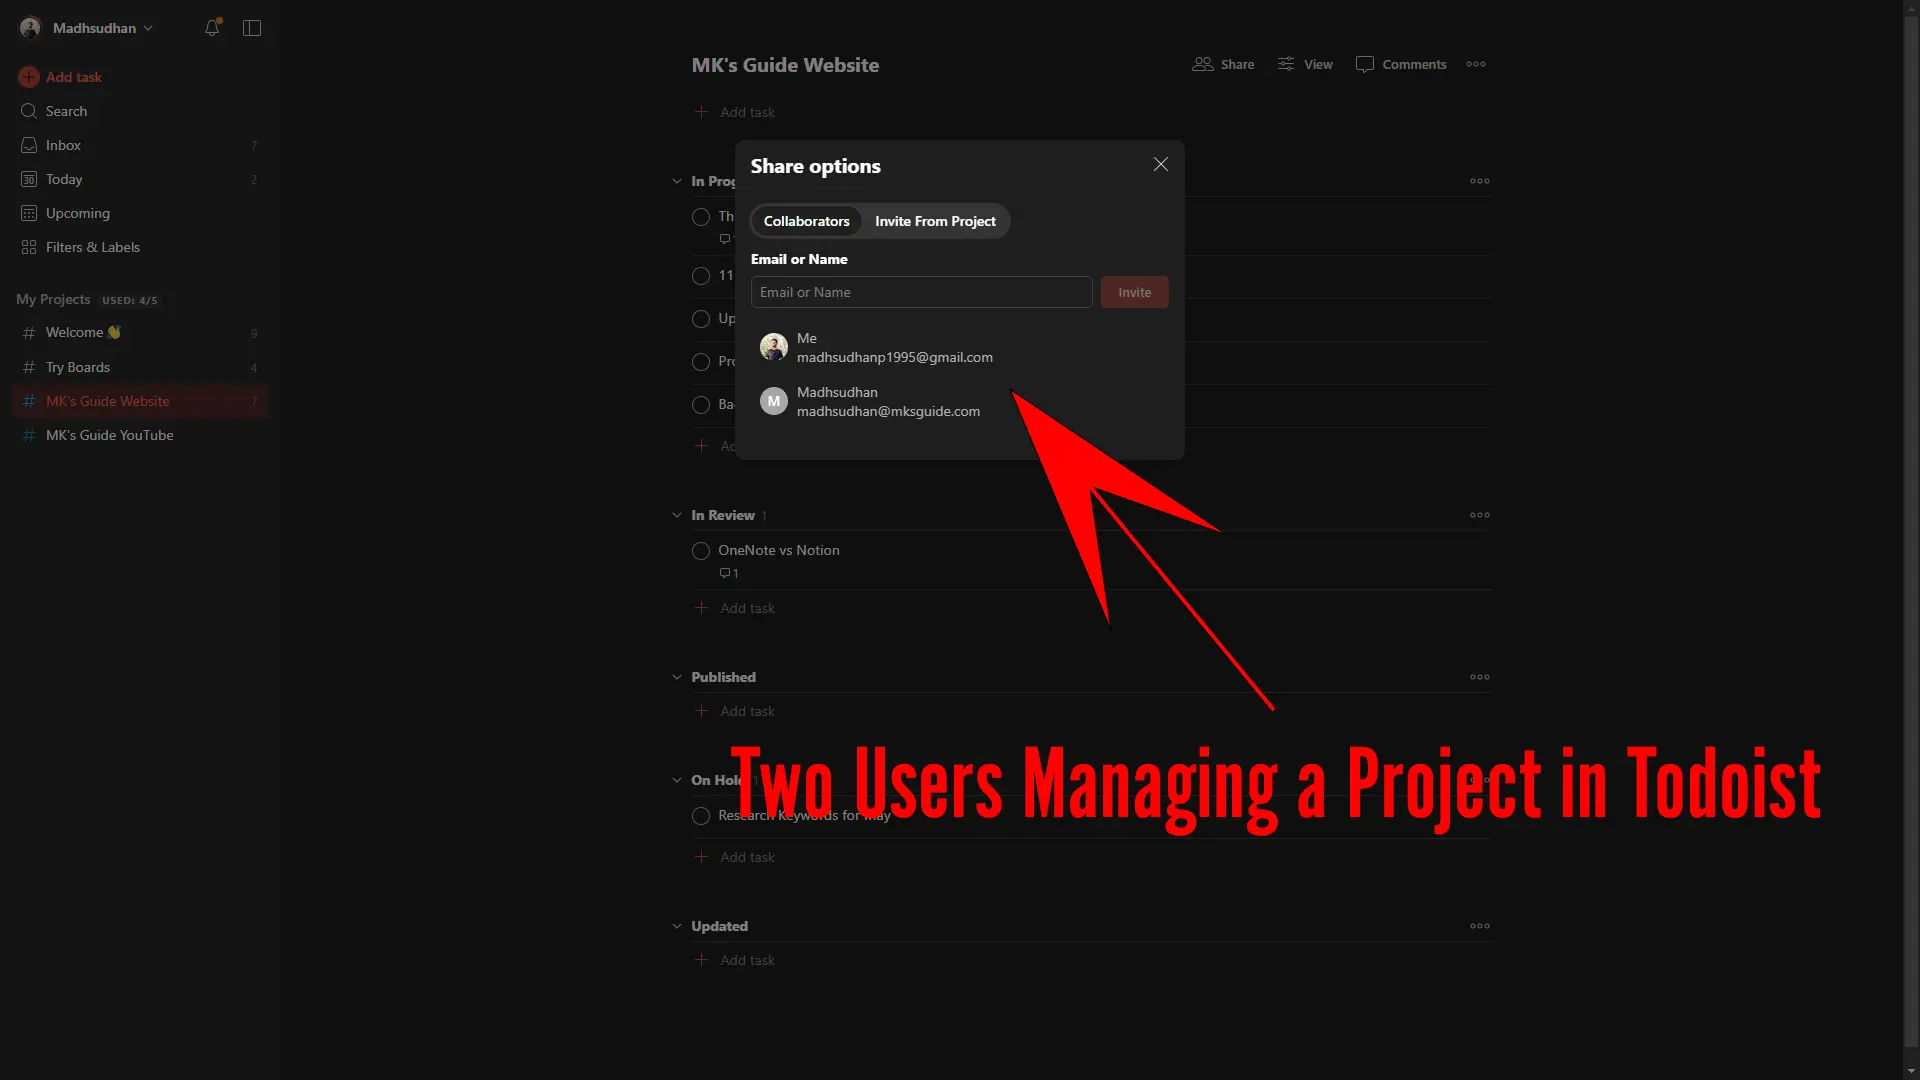 Users Managing a Project in Todoist